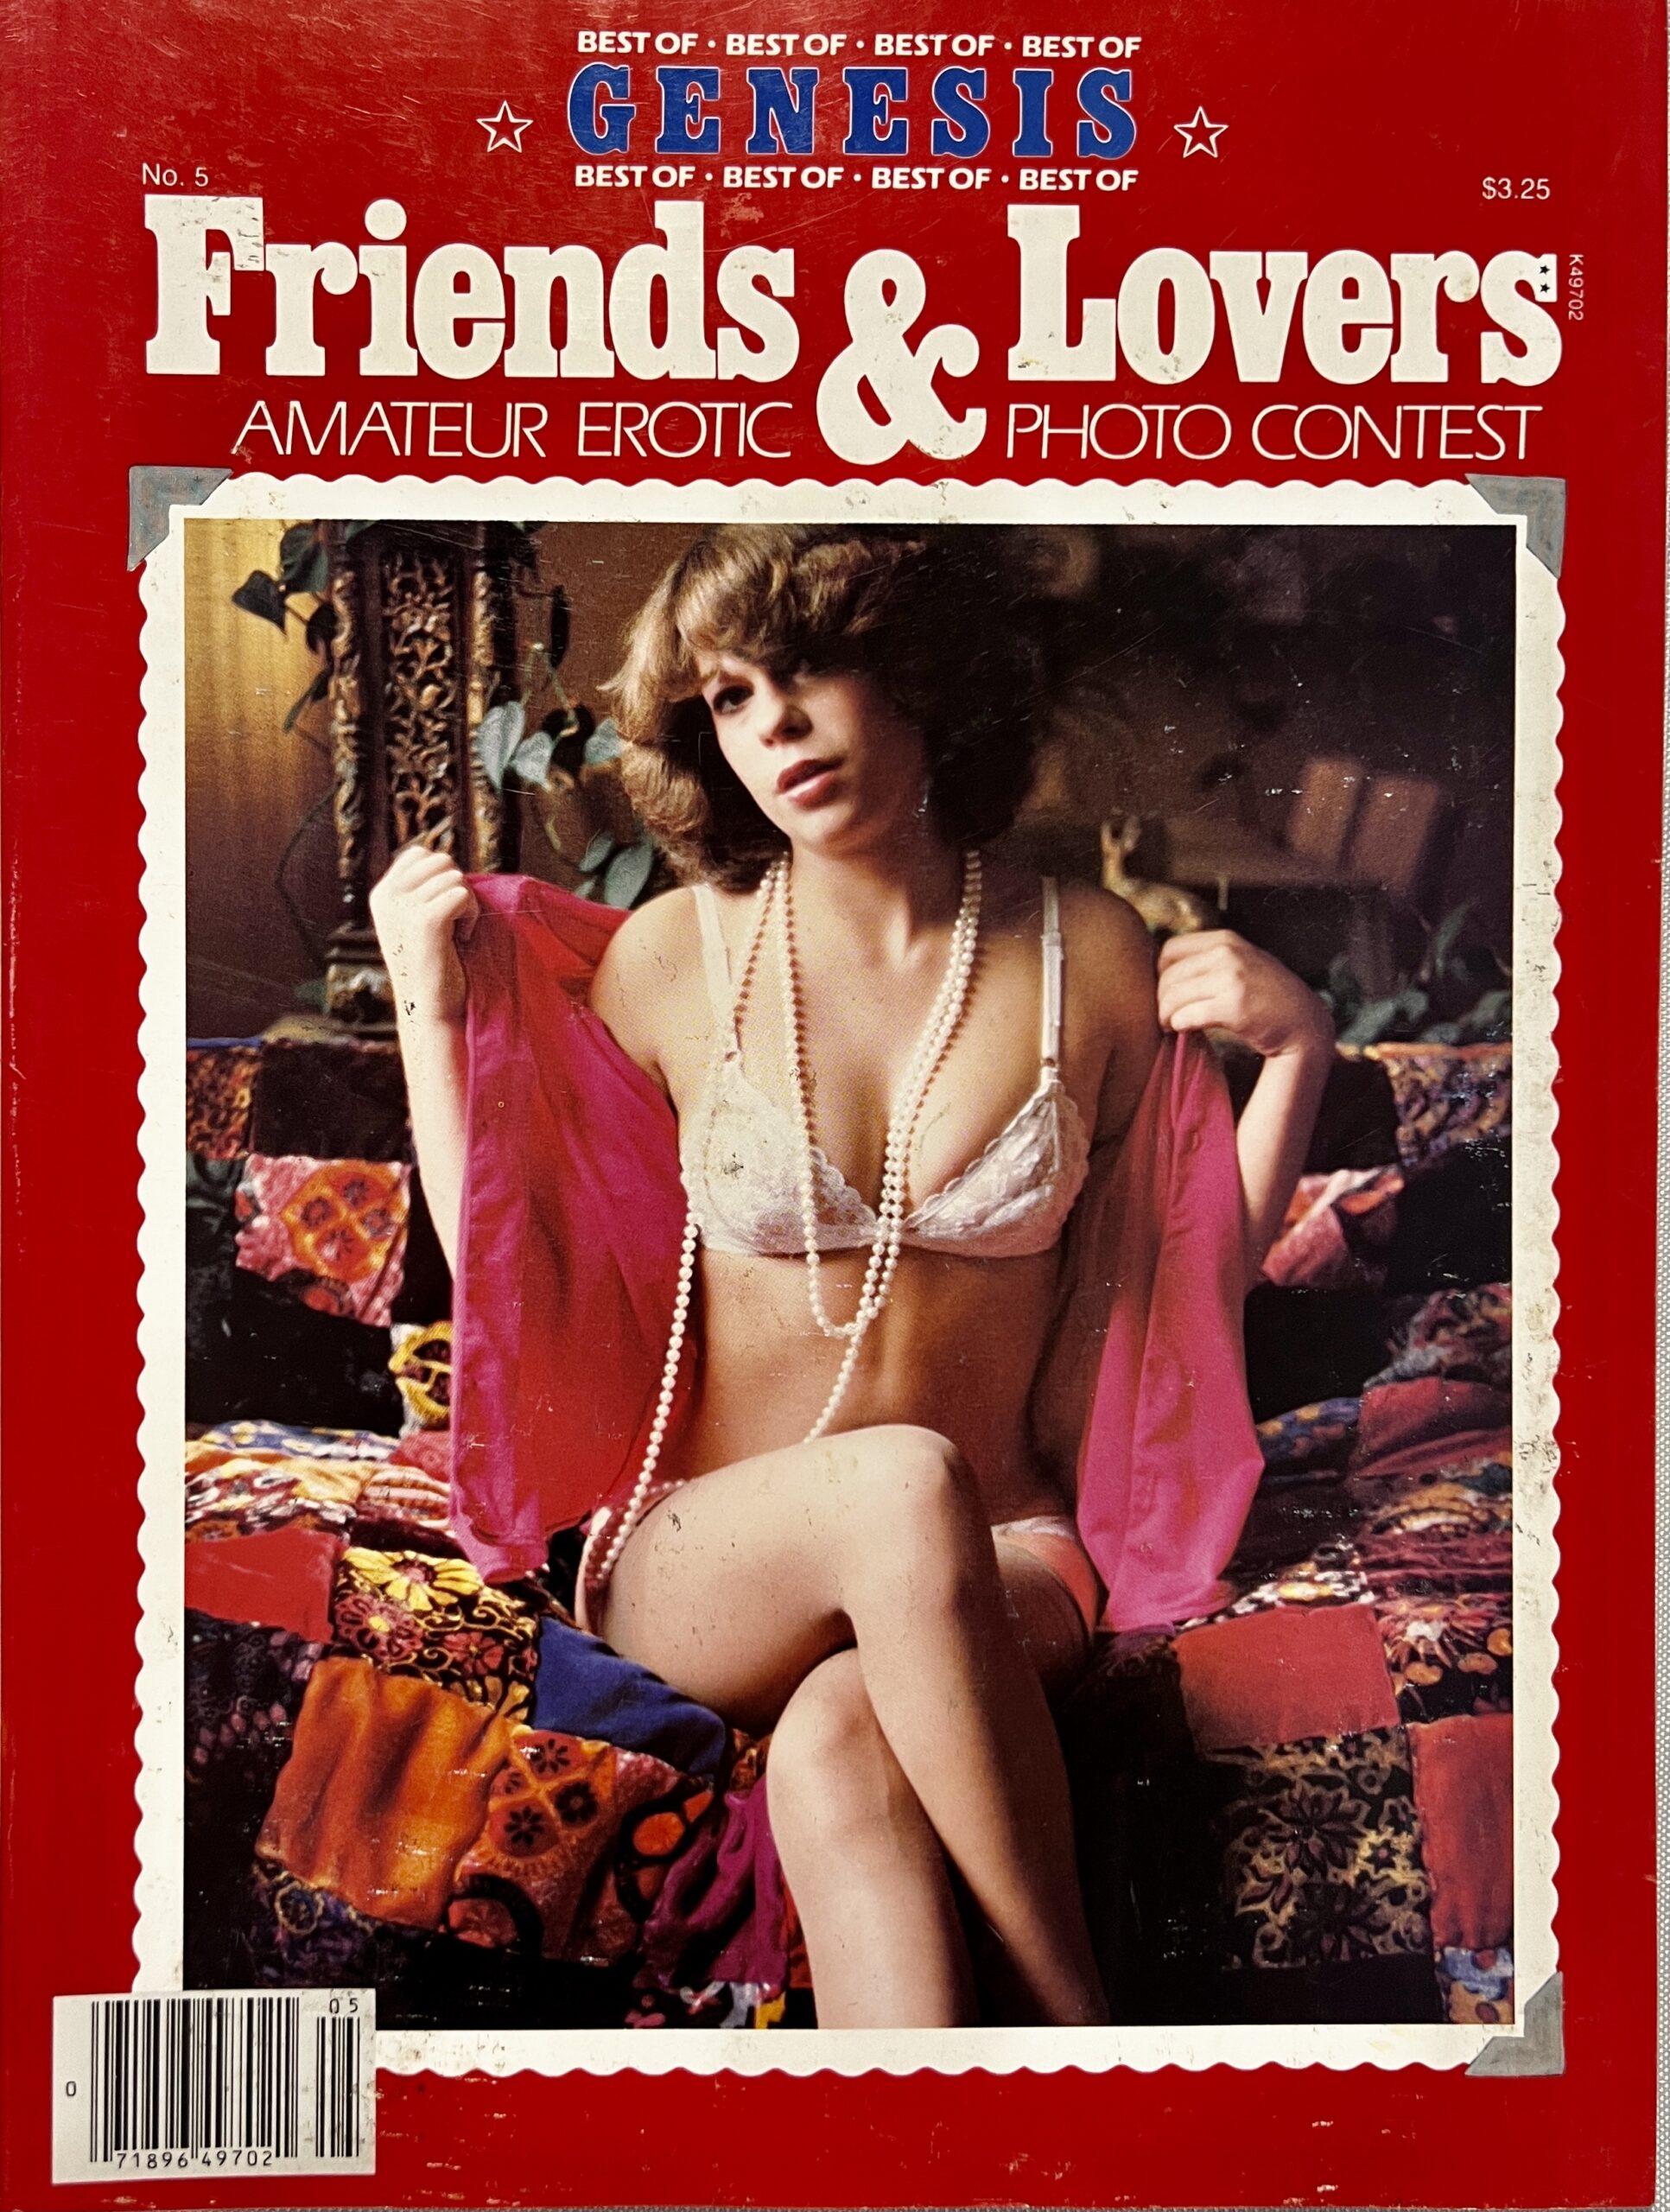 Genesis Friends and Lovers Amateur Erotic Photo Contest #5 Winter 1981 photo photo